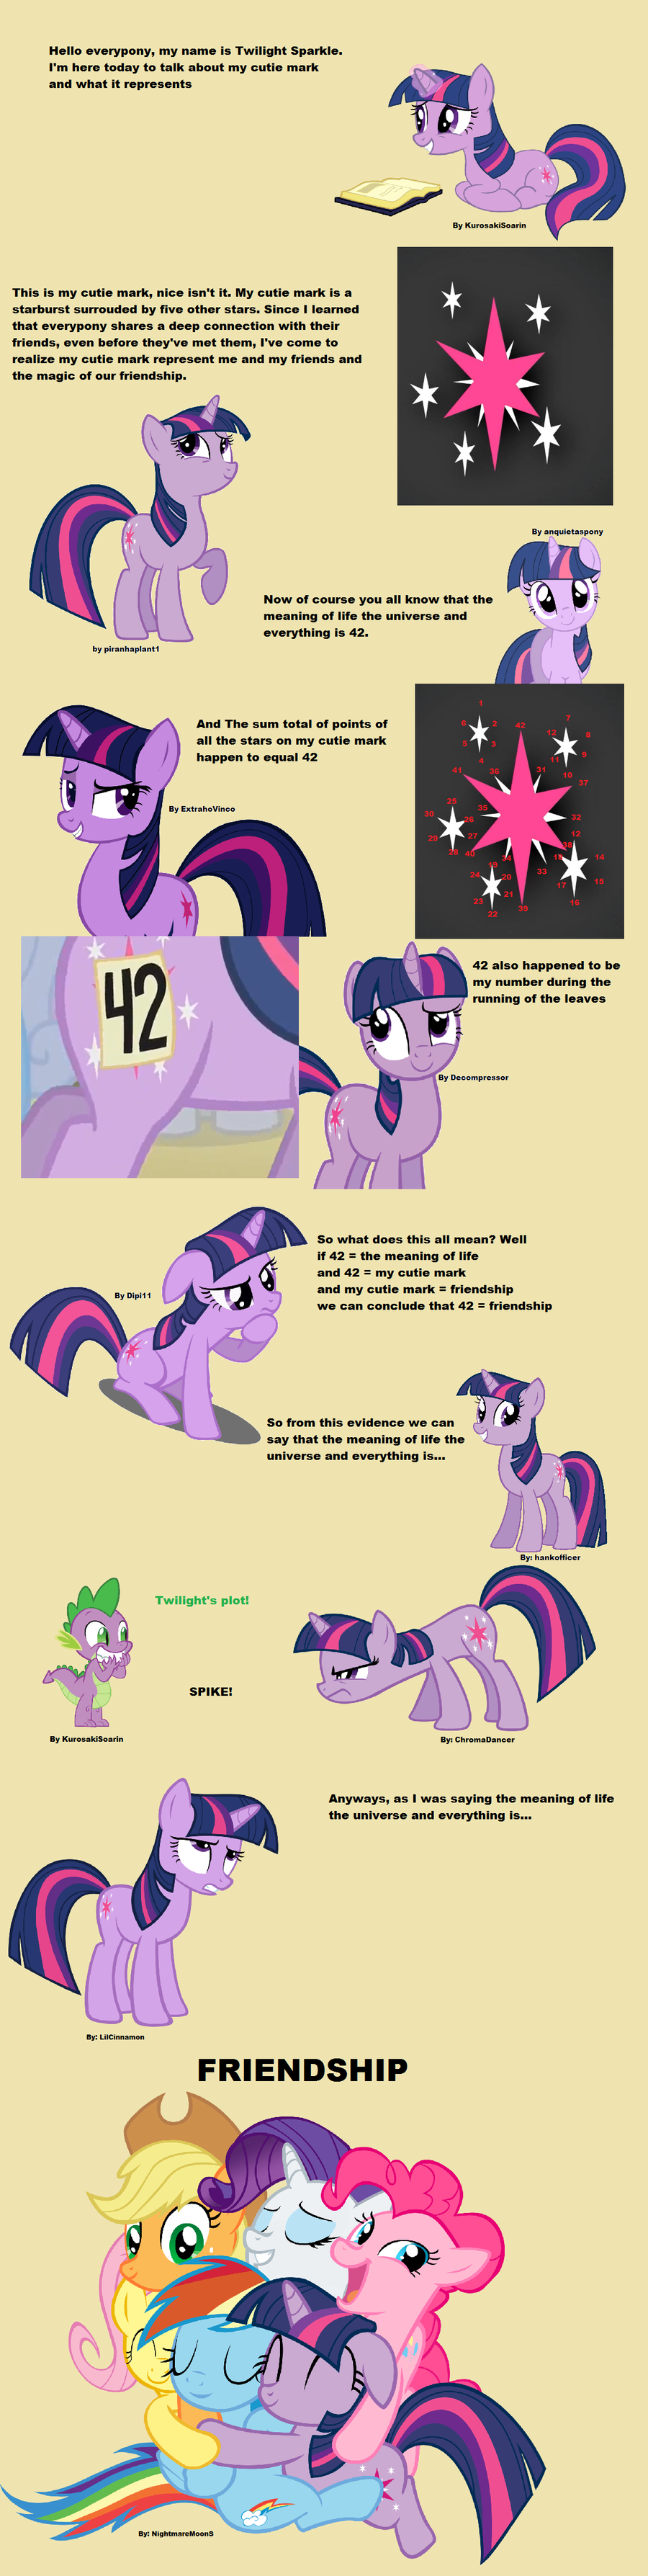 twilight__s_lecture__the_meaning_of_life_by_dr_dippy-d4w9o1k.png